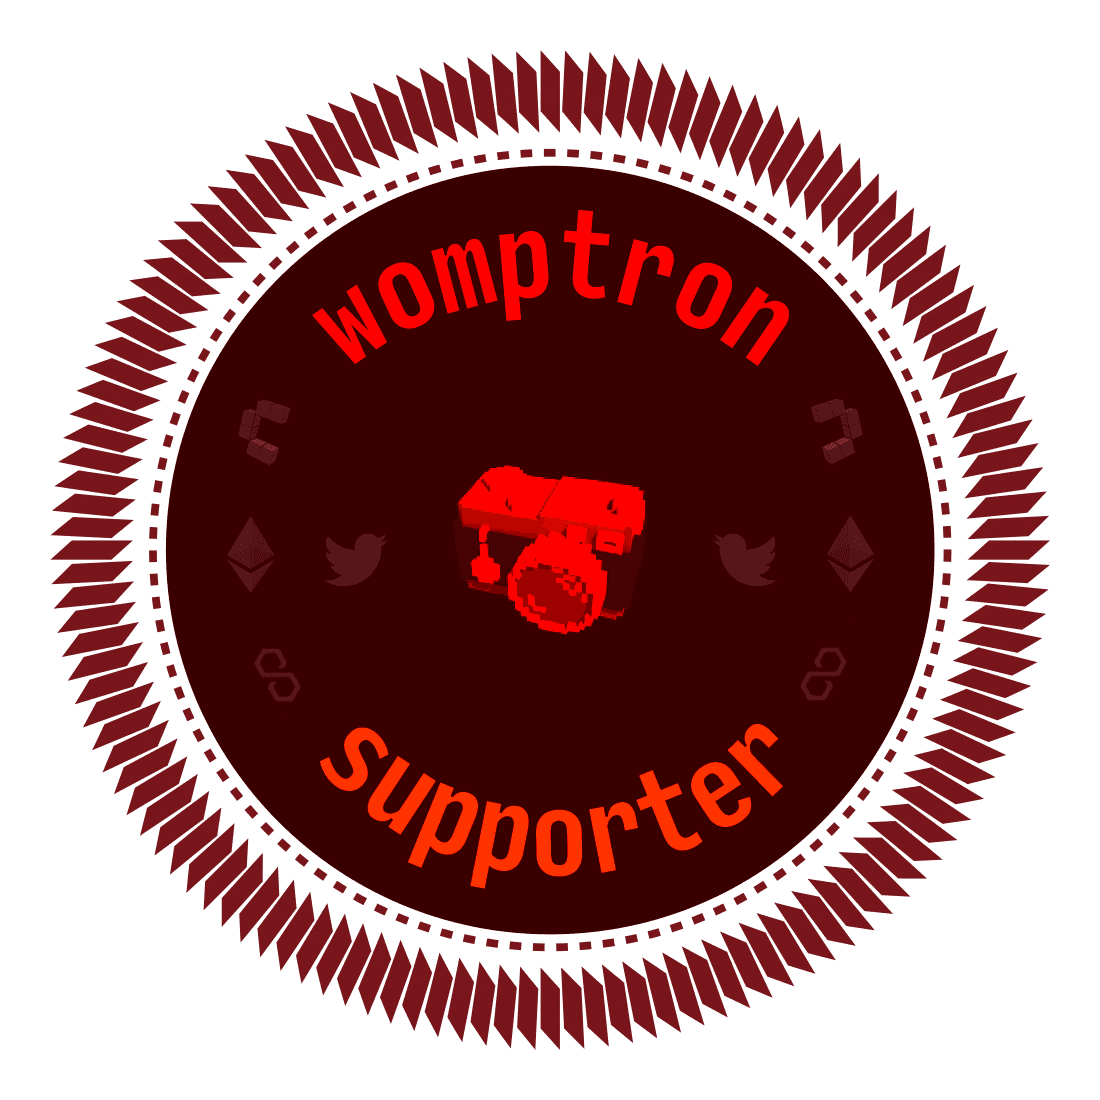 Womptron Supporter - 2nd Edition